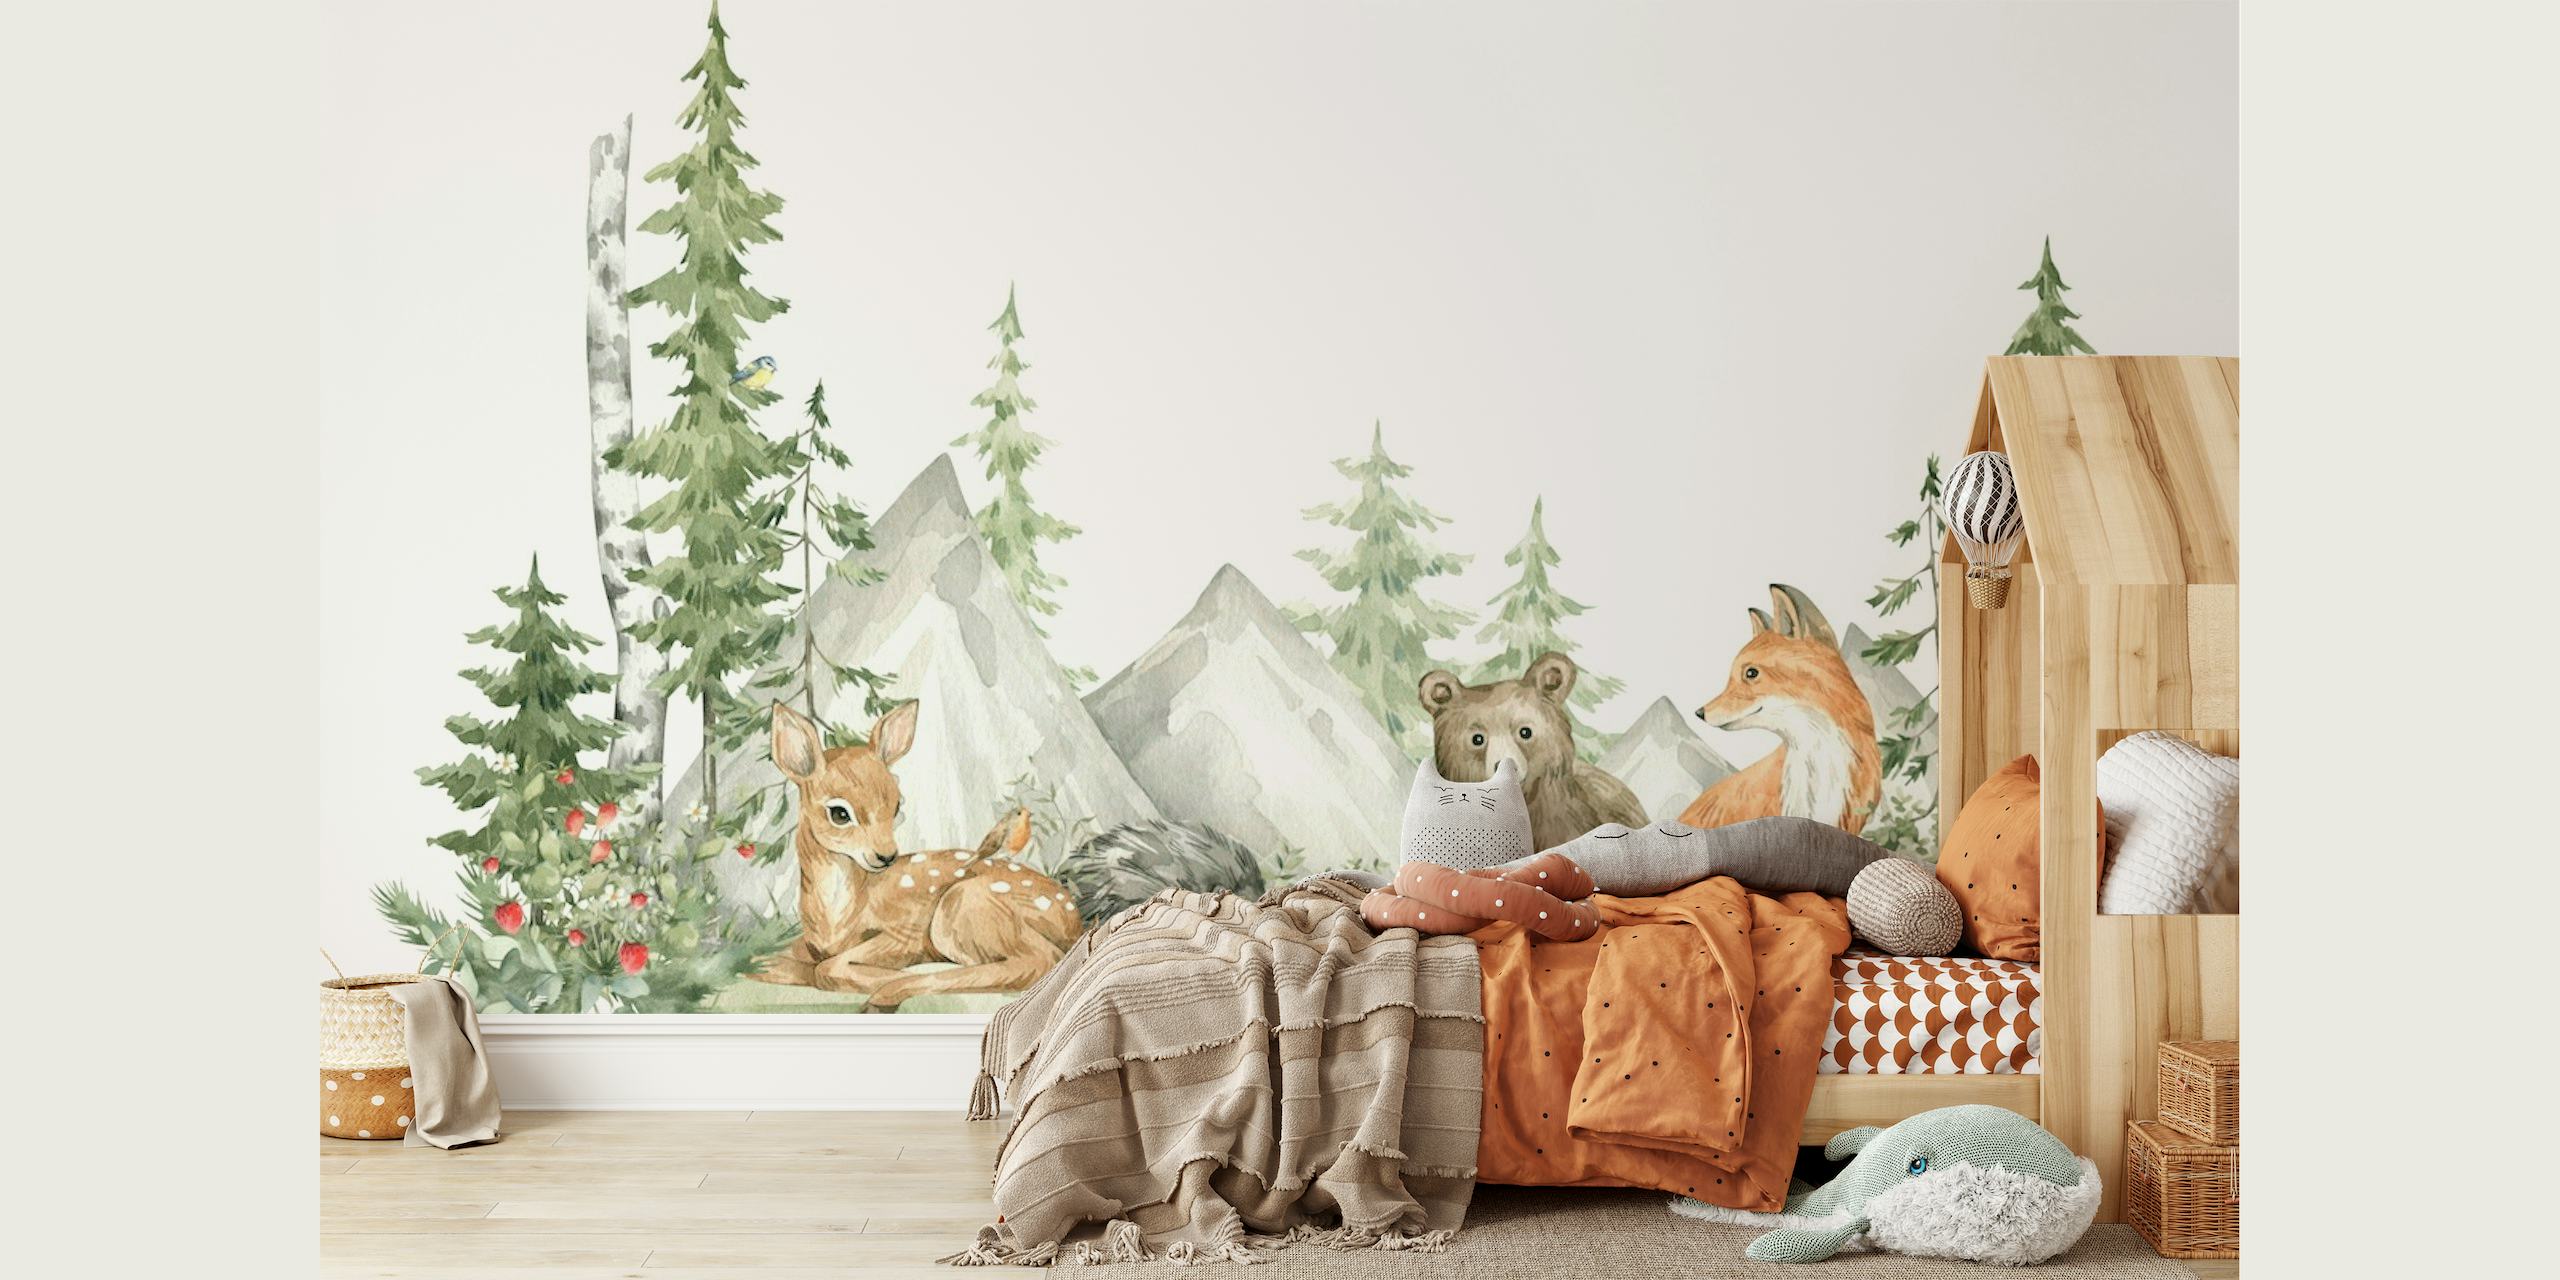 Illustrated forest animals wall mural with bear, squirrel, deer, and rabbits among trees and mountains